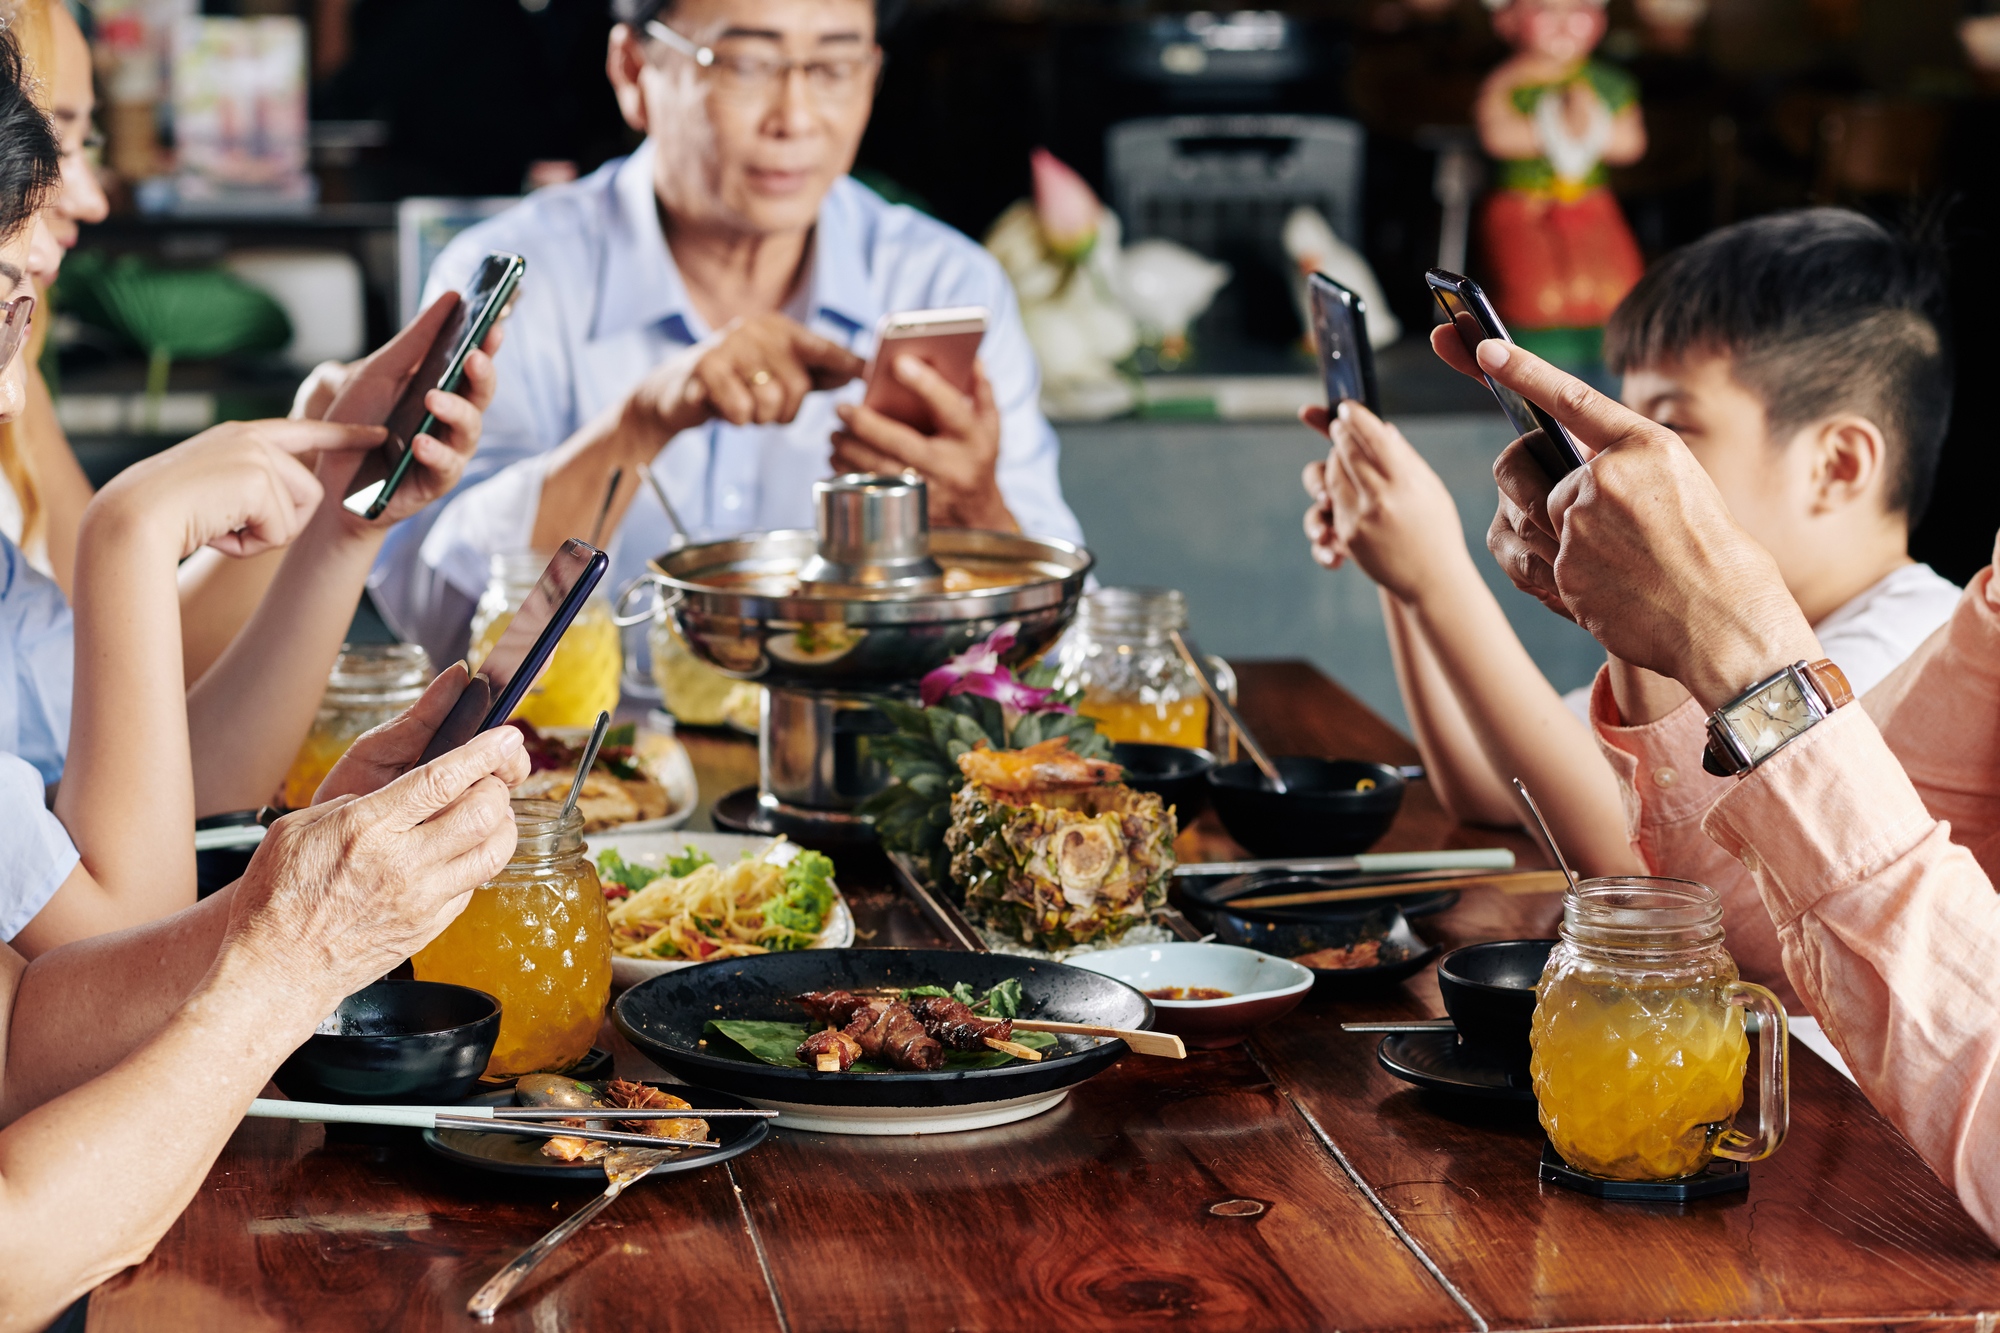 Family members with smartphones spending time on social media instead of talking during family dinner